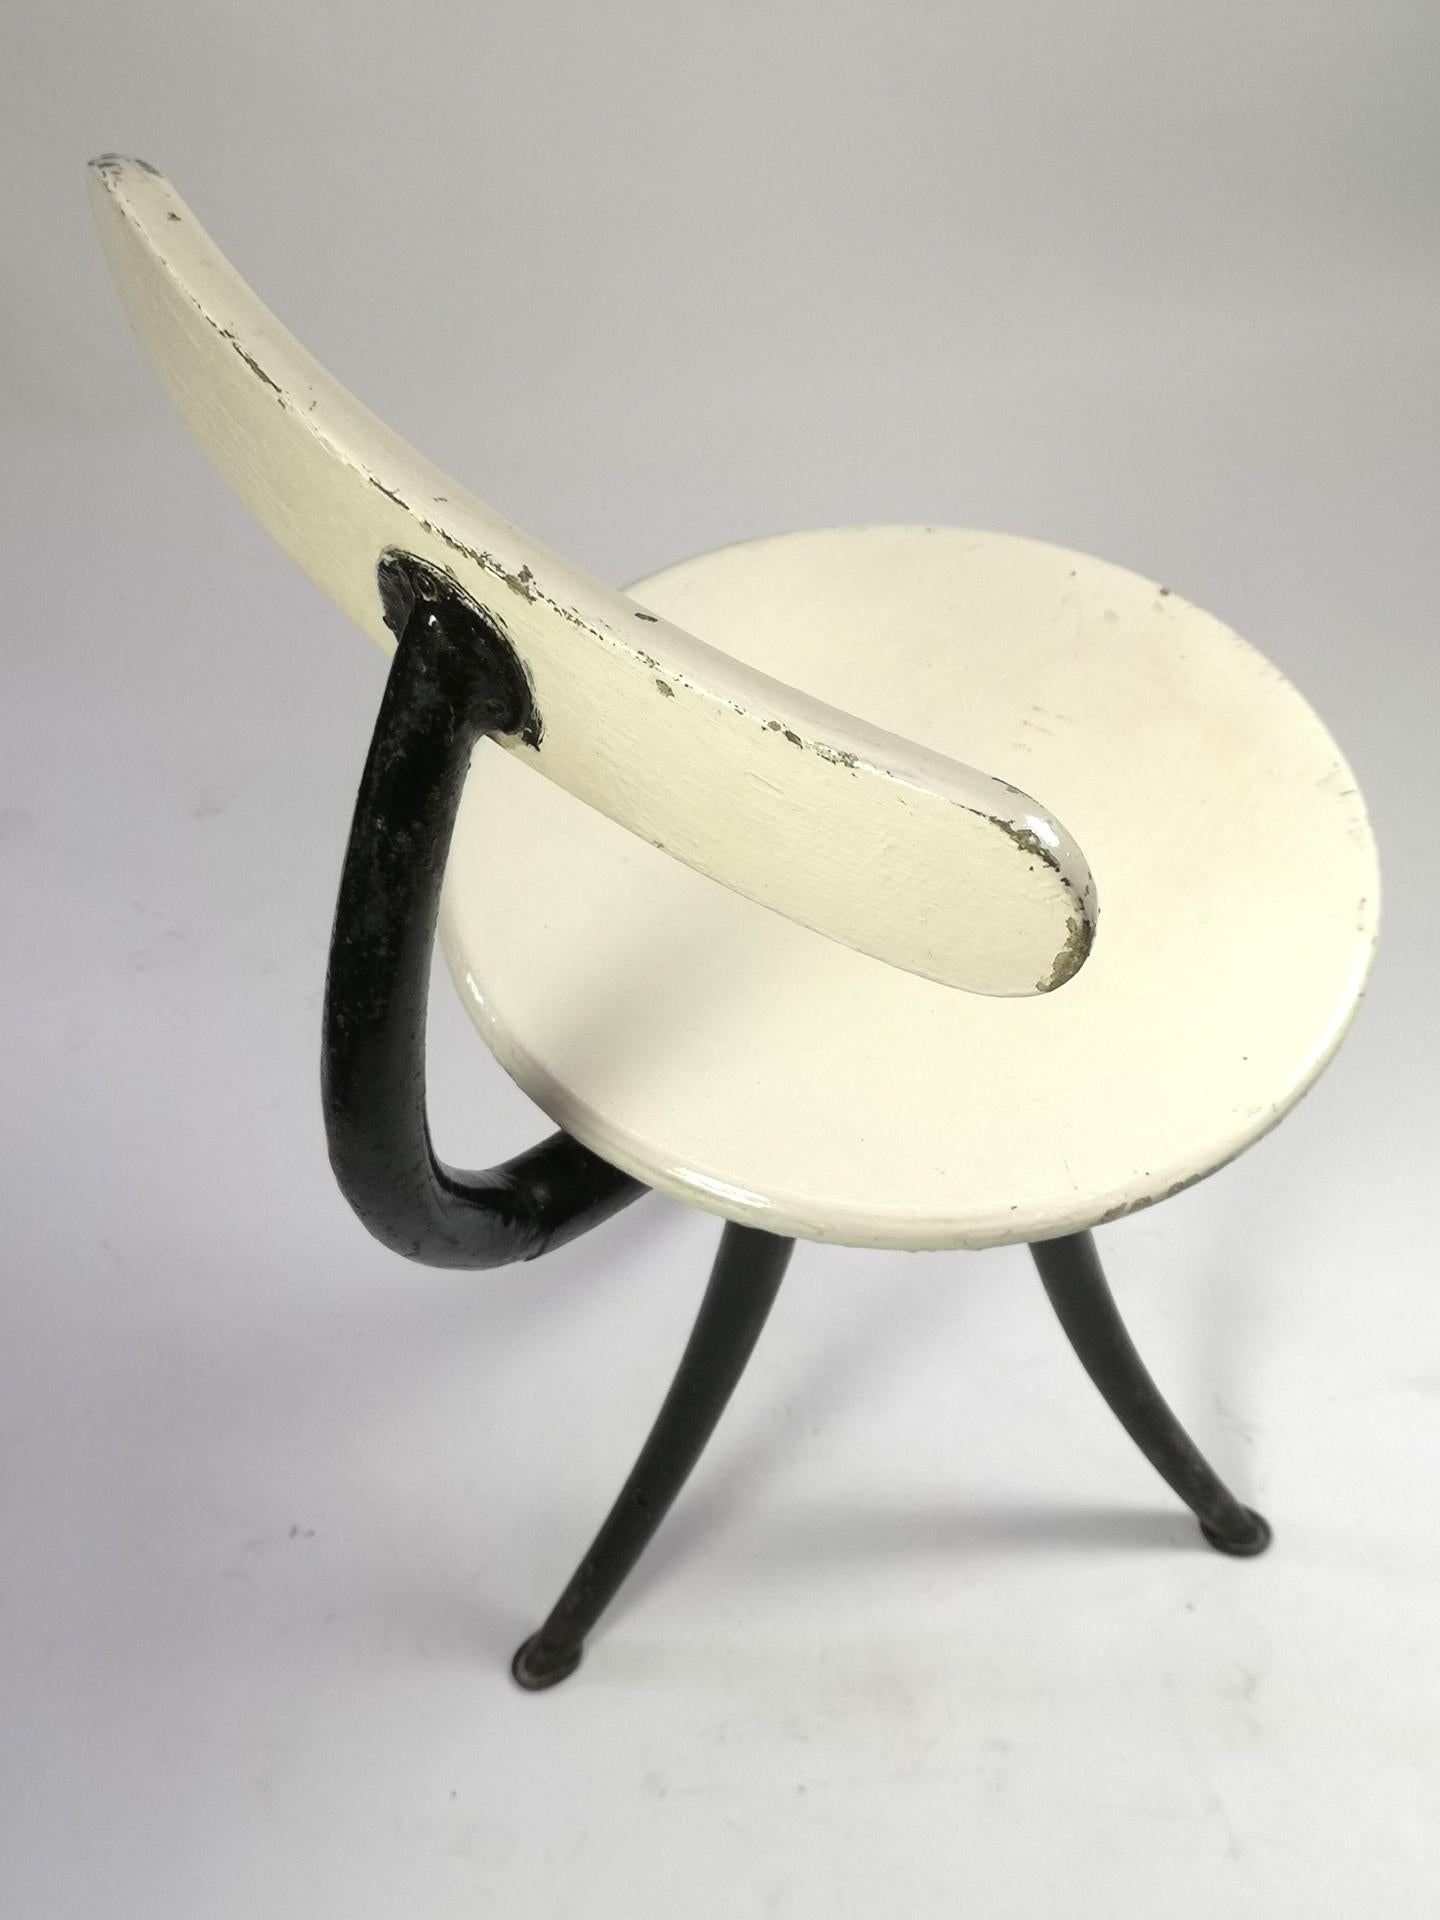 Small Art Deco Workshop Chair by Frigyes Vogel, 1936-1938 For Sale 1